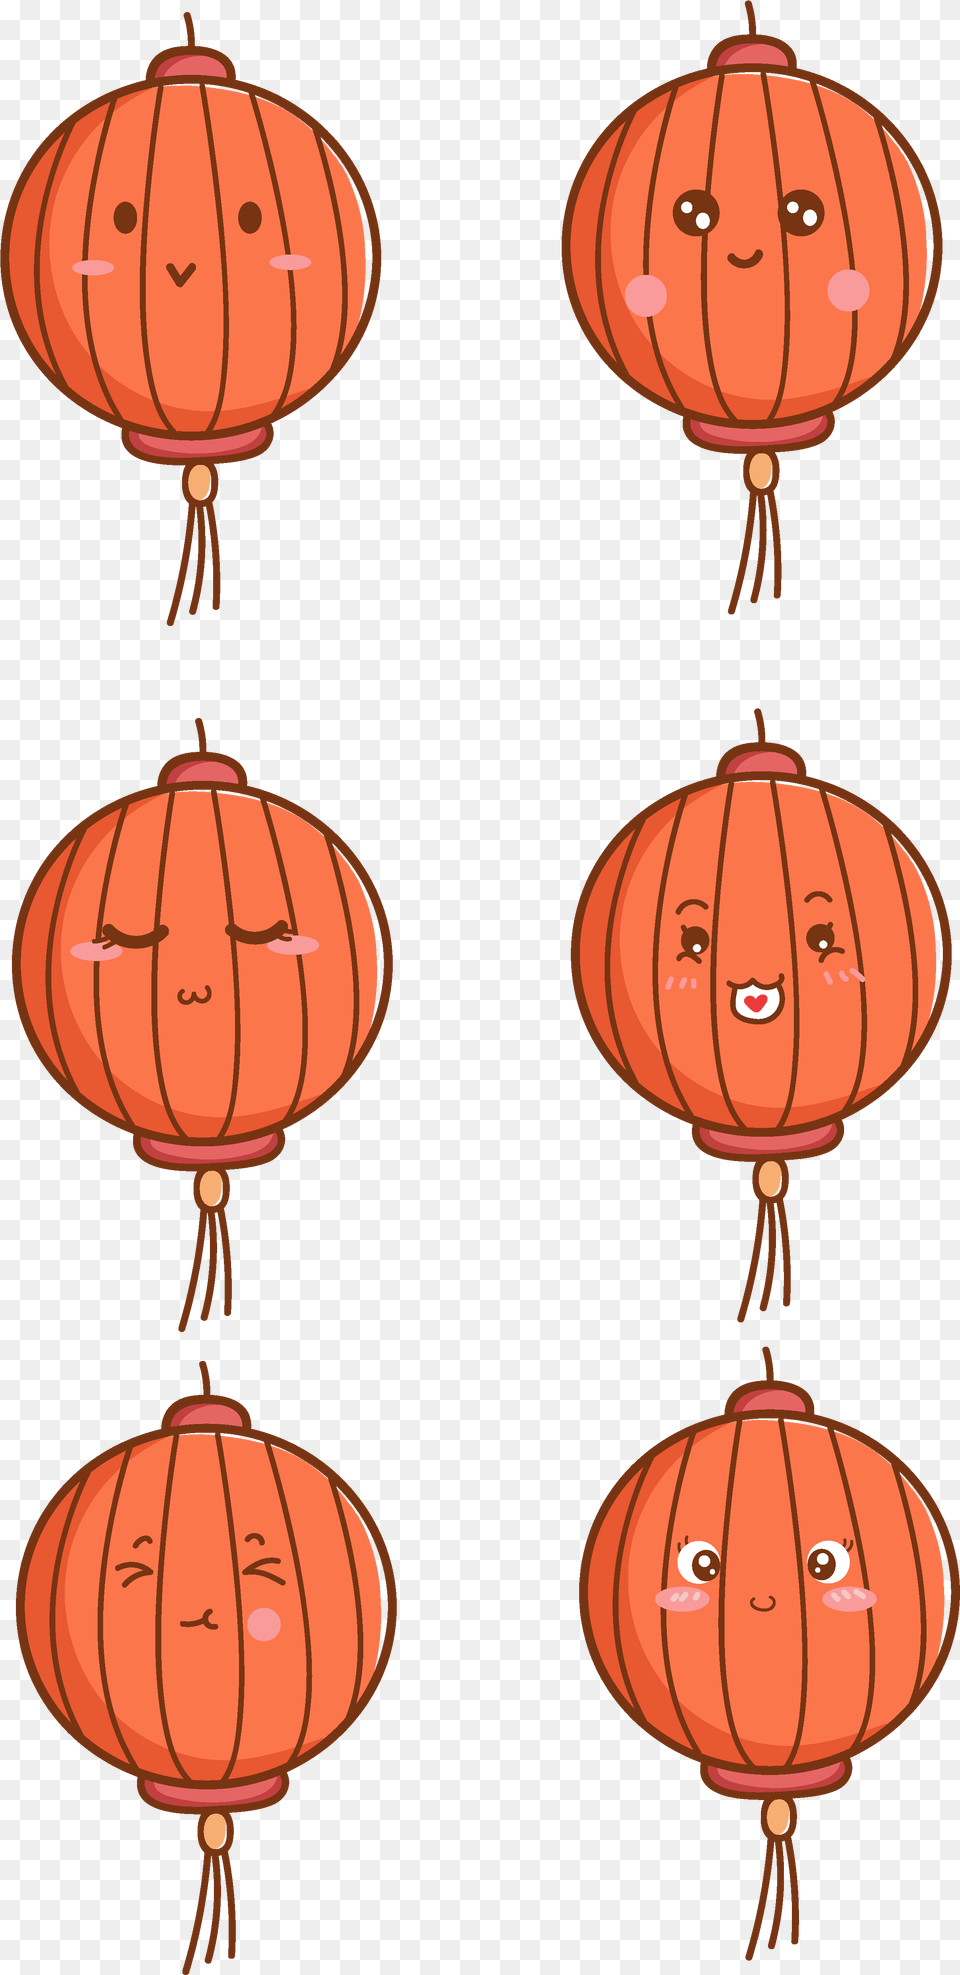 Cartoon Cute Red Lantern And Vector Image Thanksgiving, Lamp Free Png Download